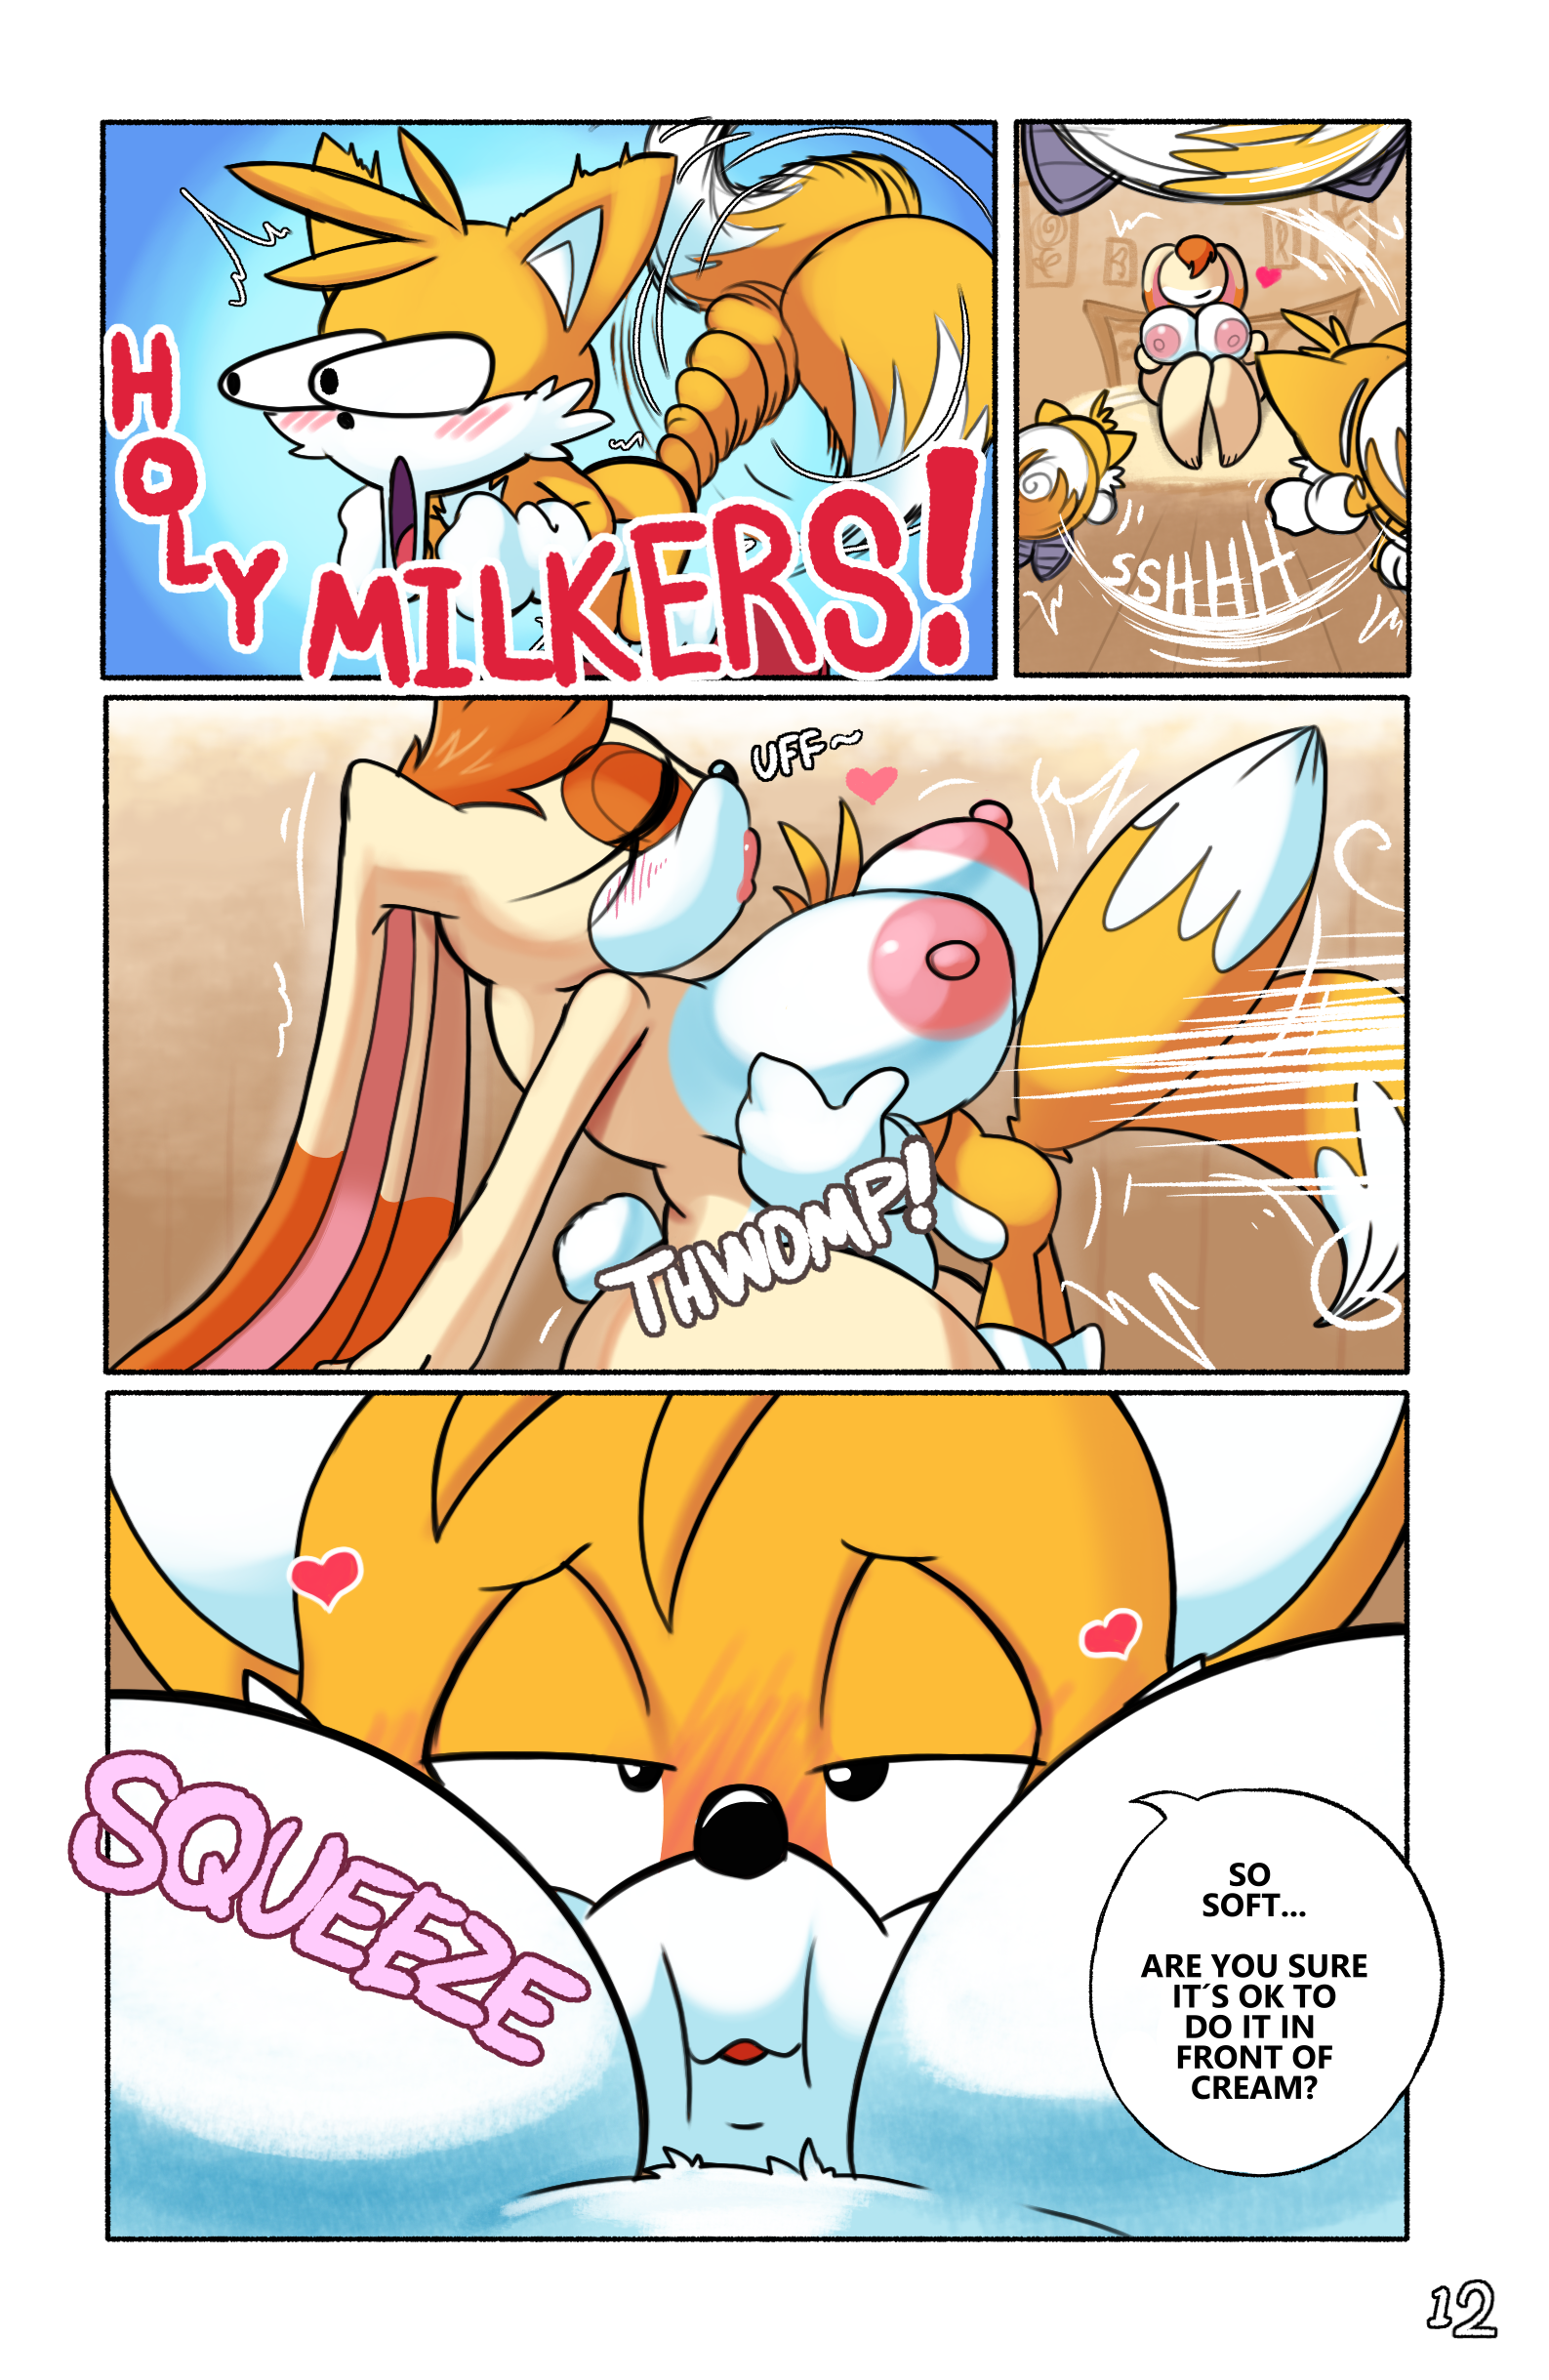 Best of Rule 34 tails